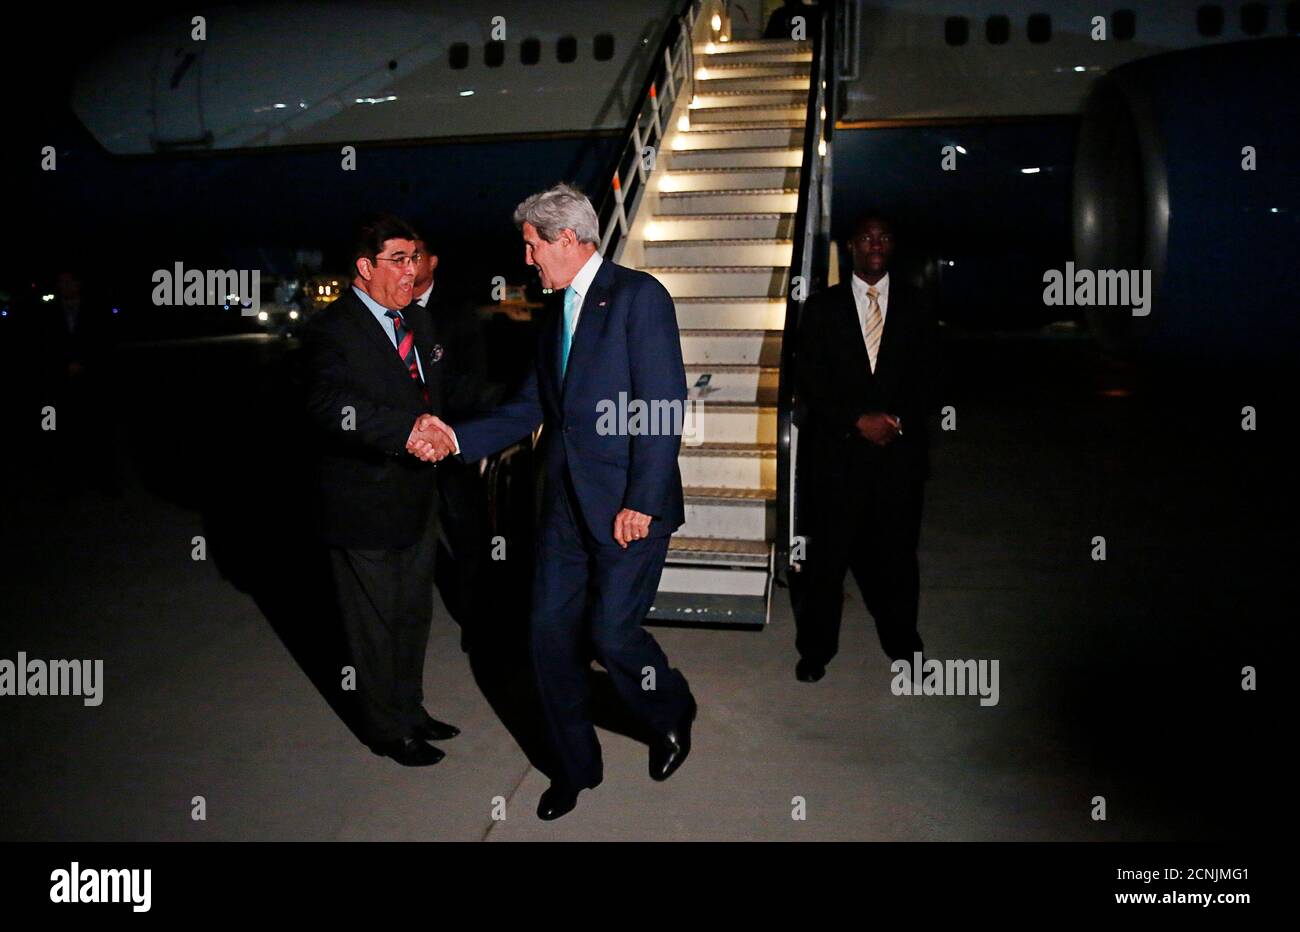 U.S. Secretary of State John Kerry is greeted by Afghanistan's Ministry of Foreign Affairs chief of protocol Ambassador Hamid Siddiq (L) as Kerry arrives at Kabul International airport in Kabul, July 11, 2014. Kerry is expected to meet with Afghanistan's President Kharzai as well as both candidates in Afghanistan's recent presidential election.  REUTERS/Jim Bourg    (AFGHANISTAN - Tags: POLITICS) Stock Photo